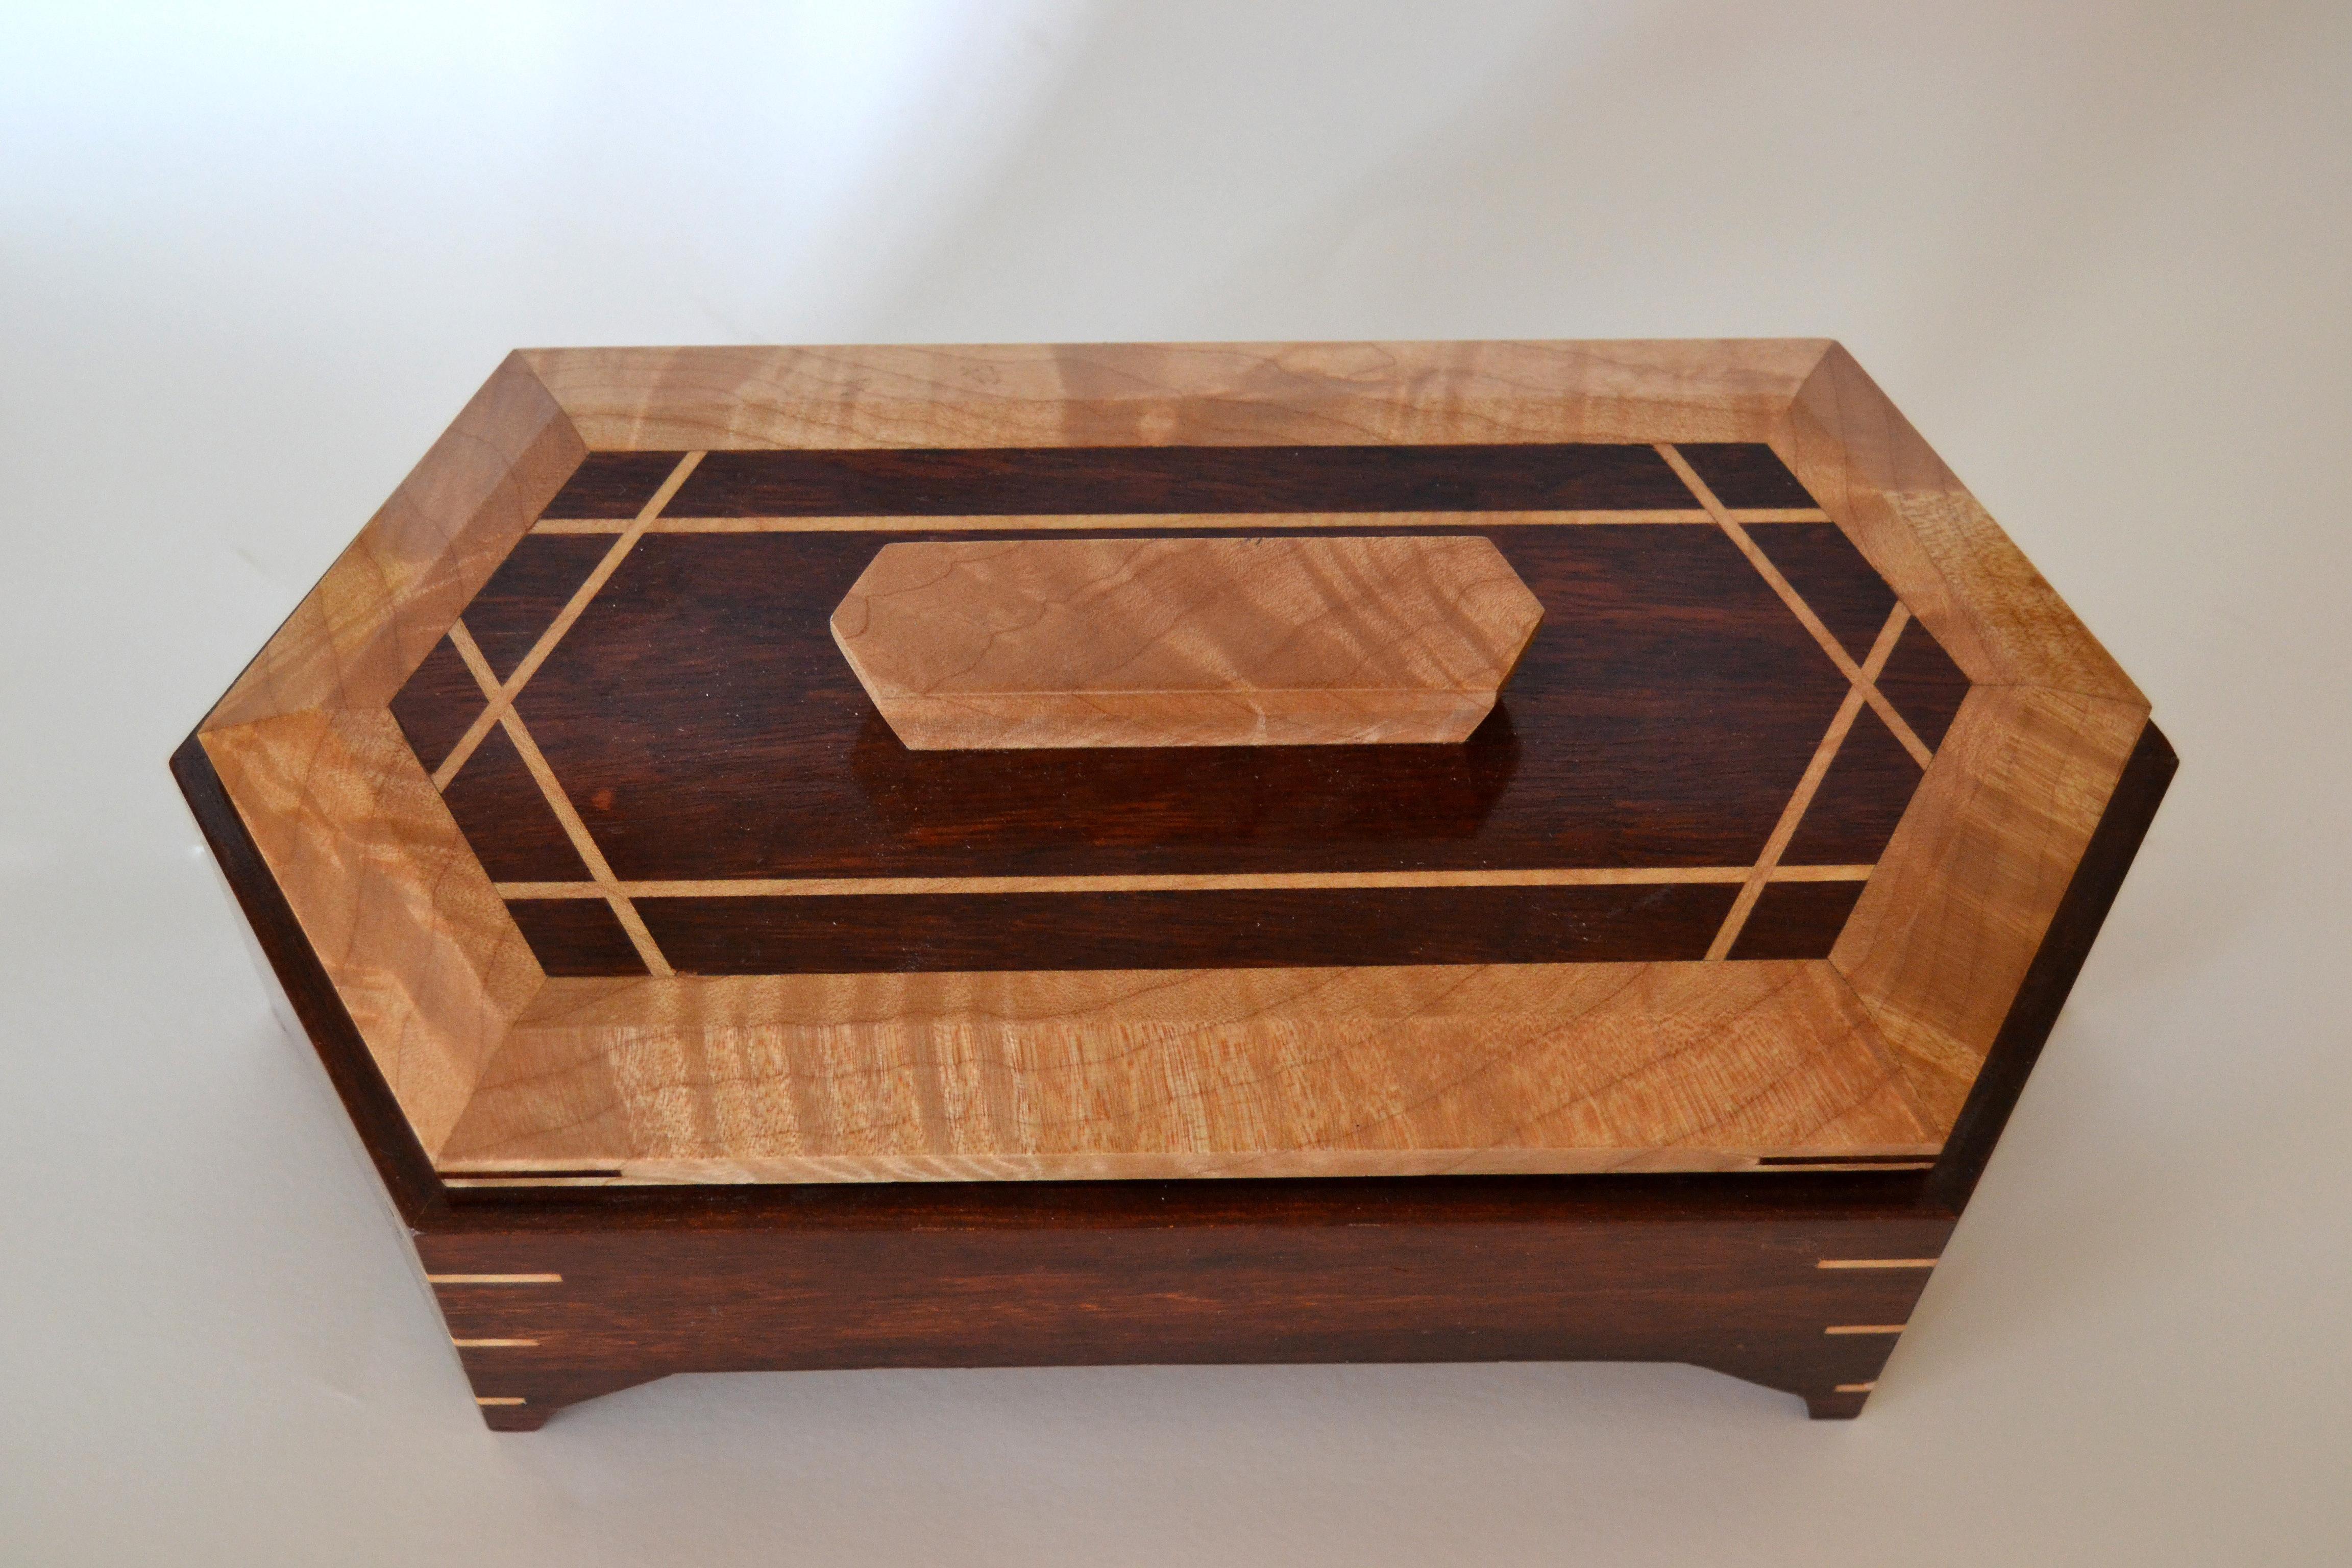 Hand-Crafted Vintage Two-Tone Handcrafted Decorative Mahogany Keepsake Wooden Box with Lid